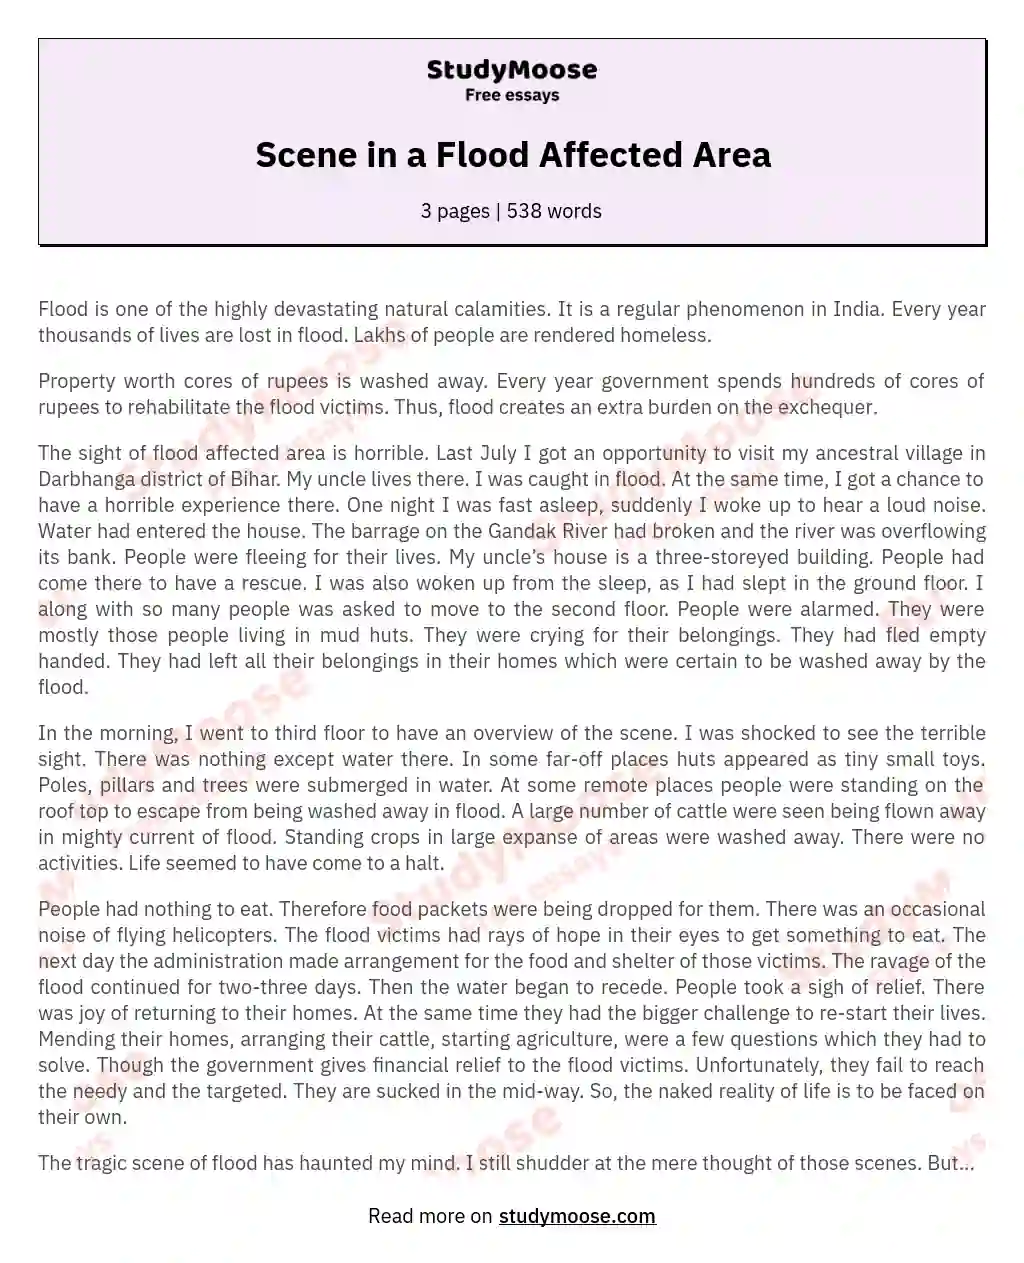 Scene in a Flood Affected Area essay